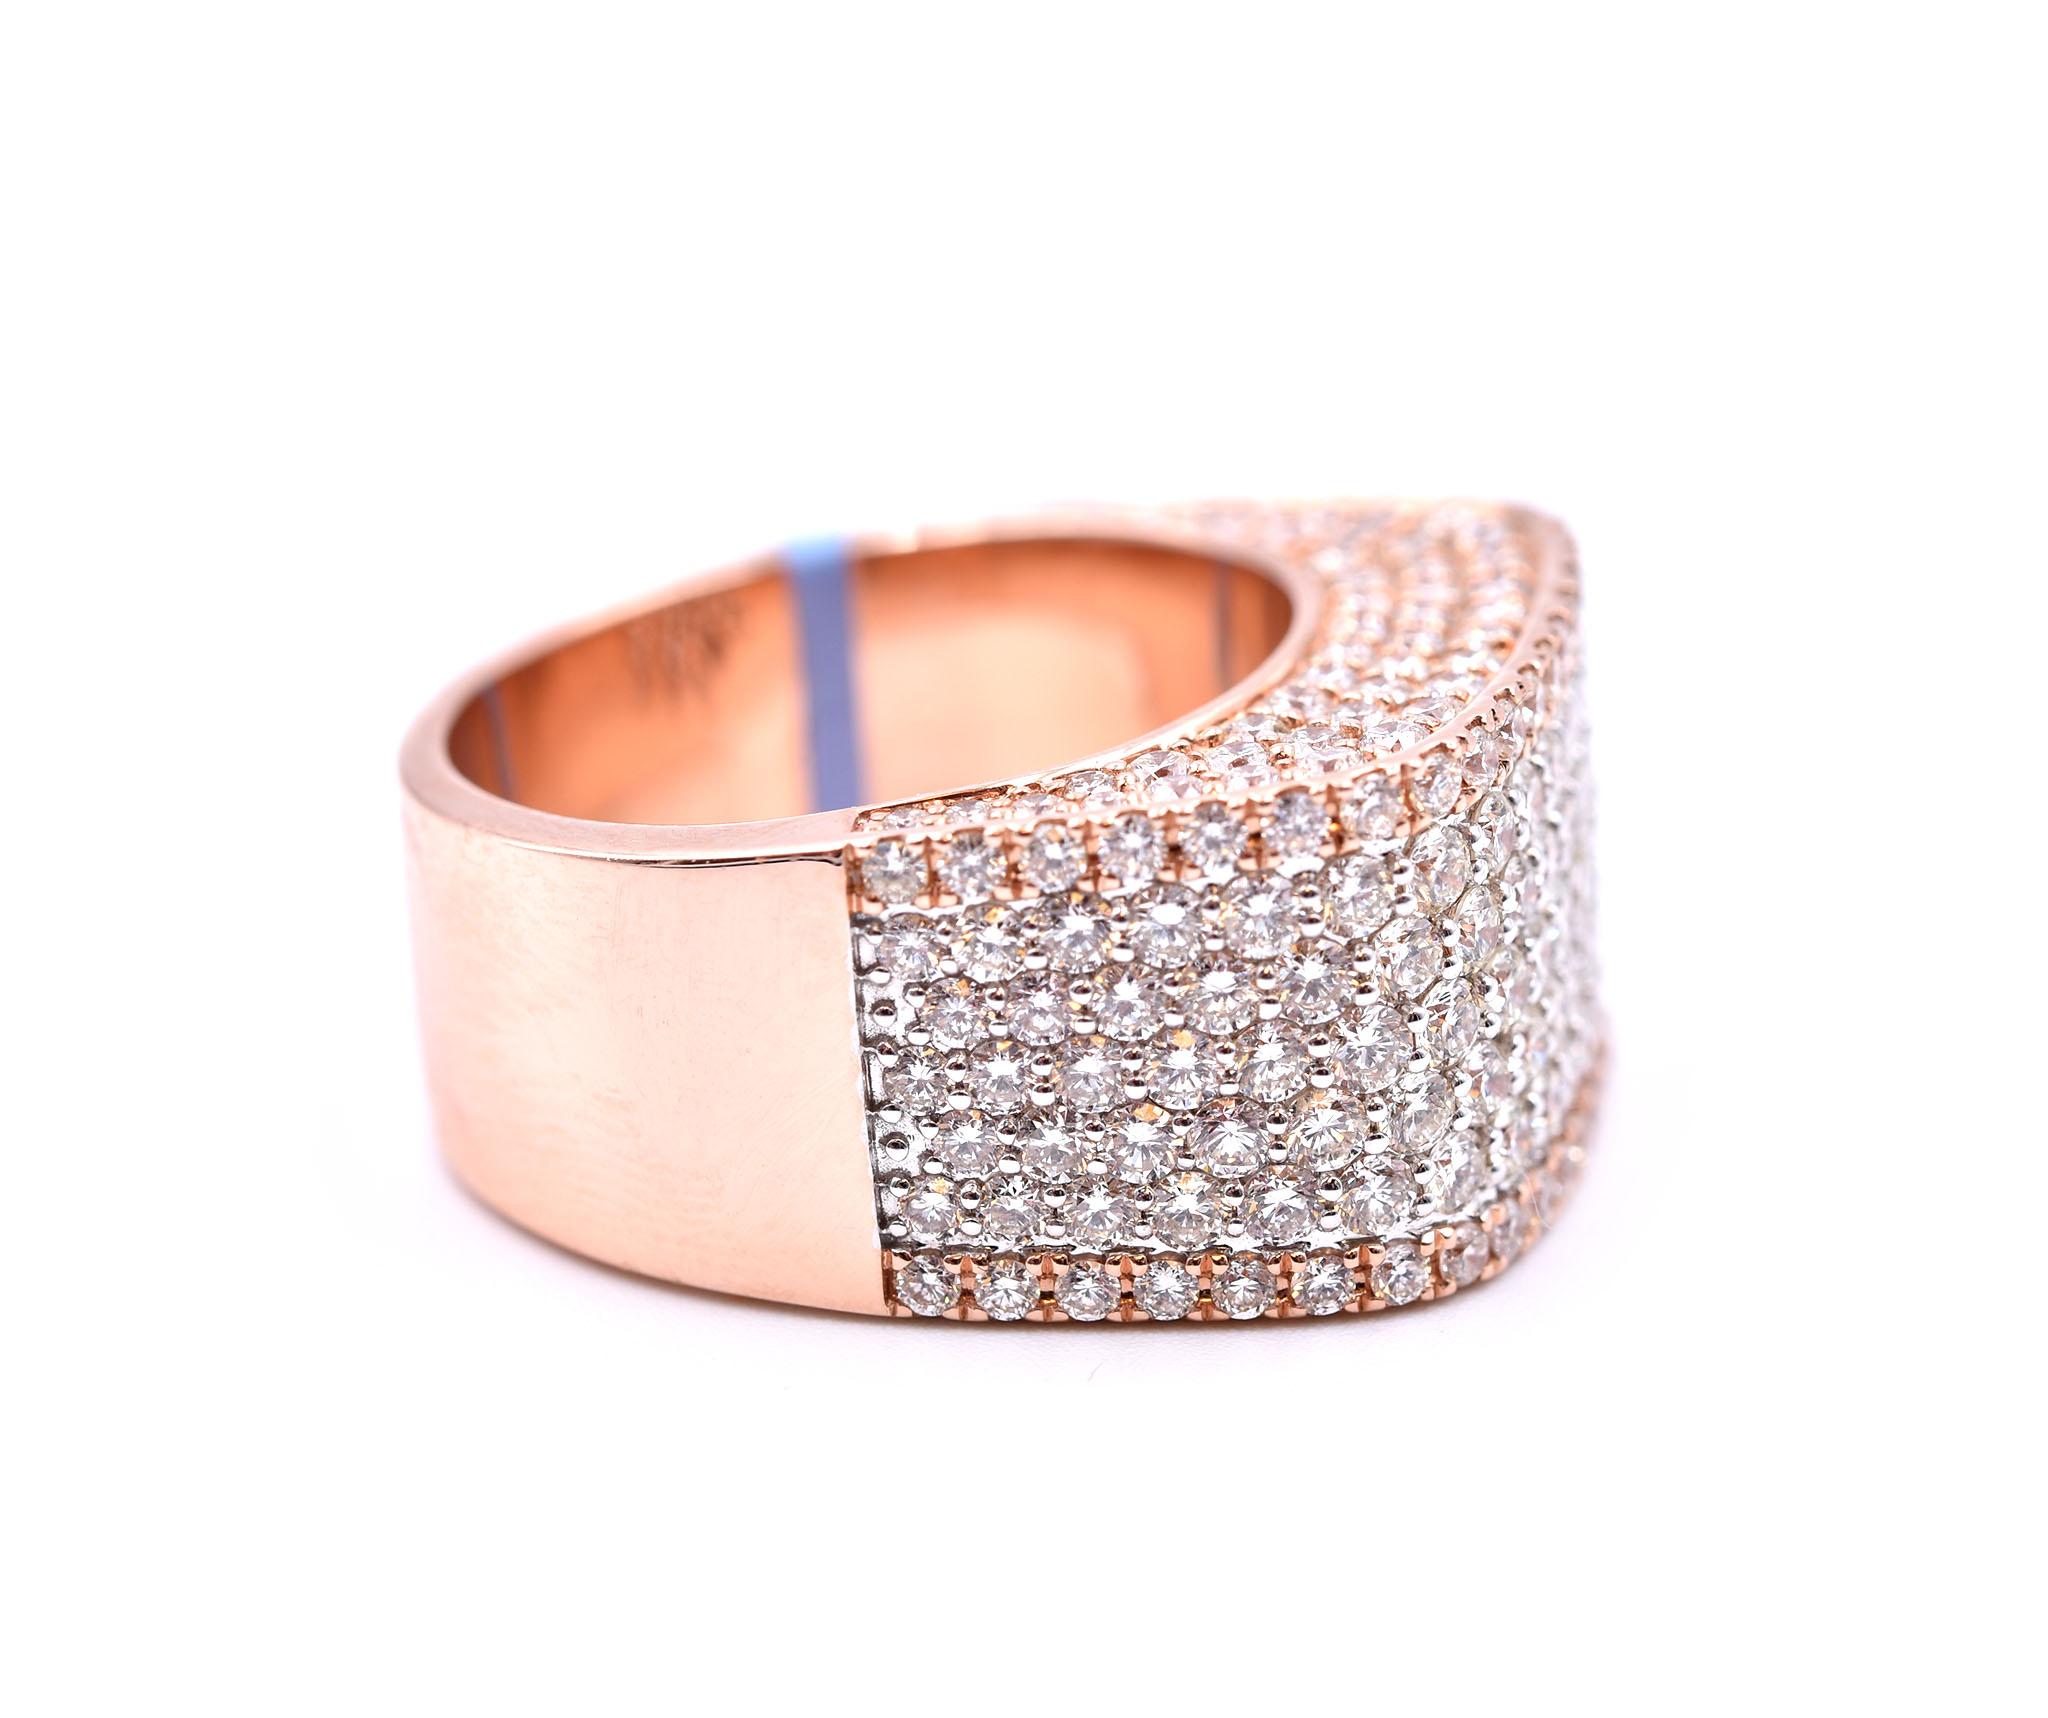 Designer: custom design
Material: 14k rose gold
Diamonds: round brilliant cut = 5.35cttw
Color: G
Clarity: VS
Ring size: 10 (please allow two additional shipping days for sizing requests)
Dimensions: ring is approximately 13.33mm by 20mm
Weight: